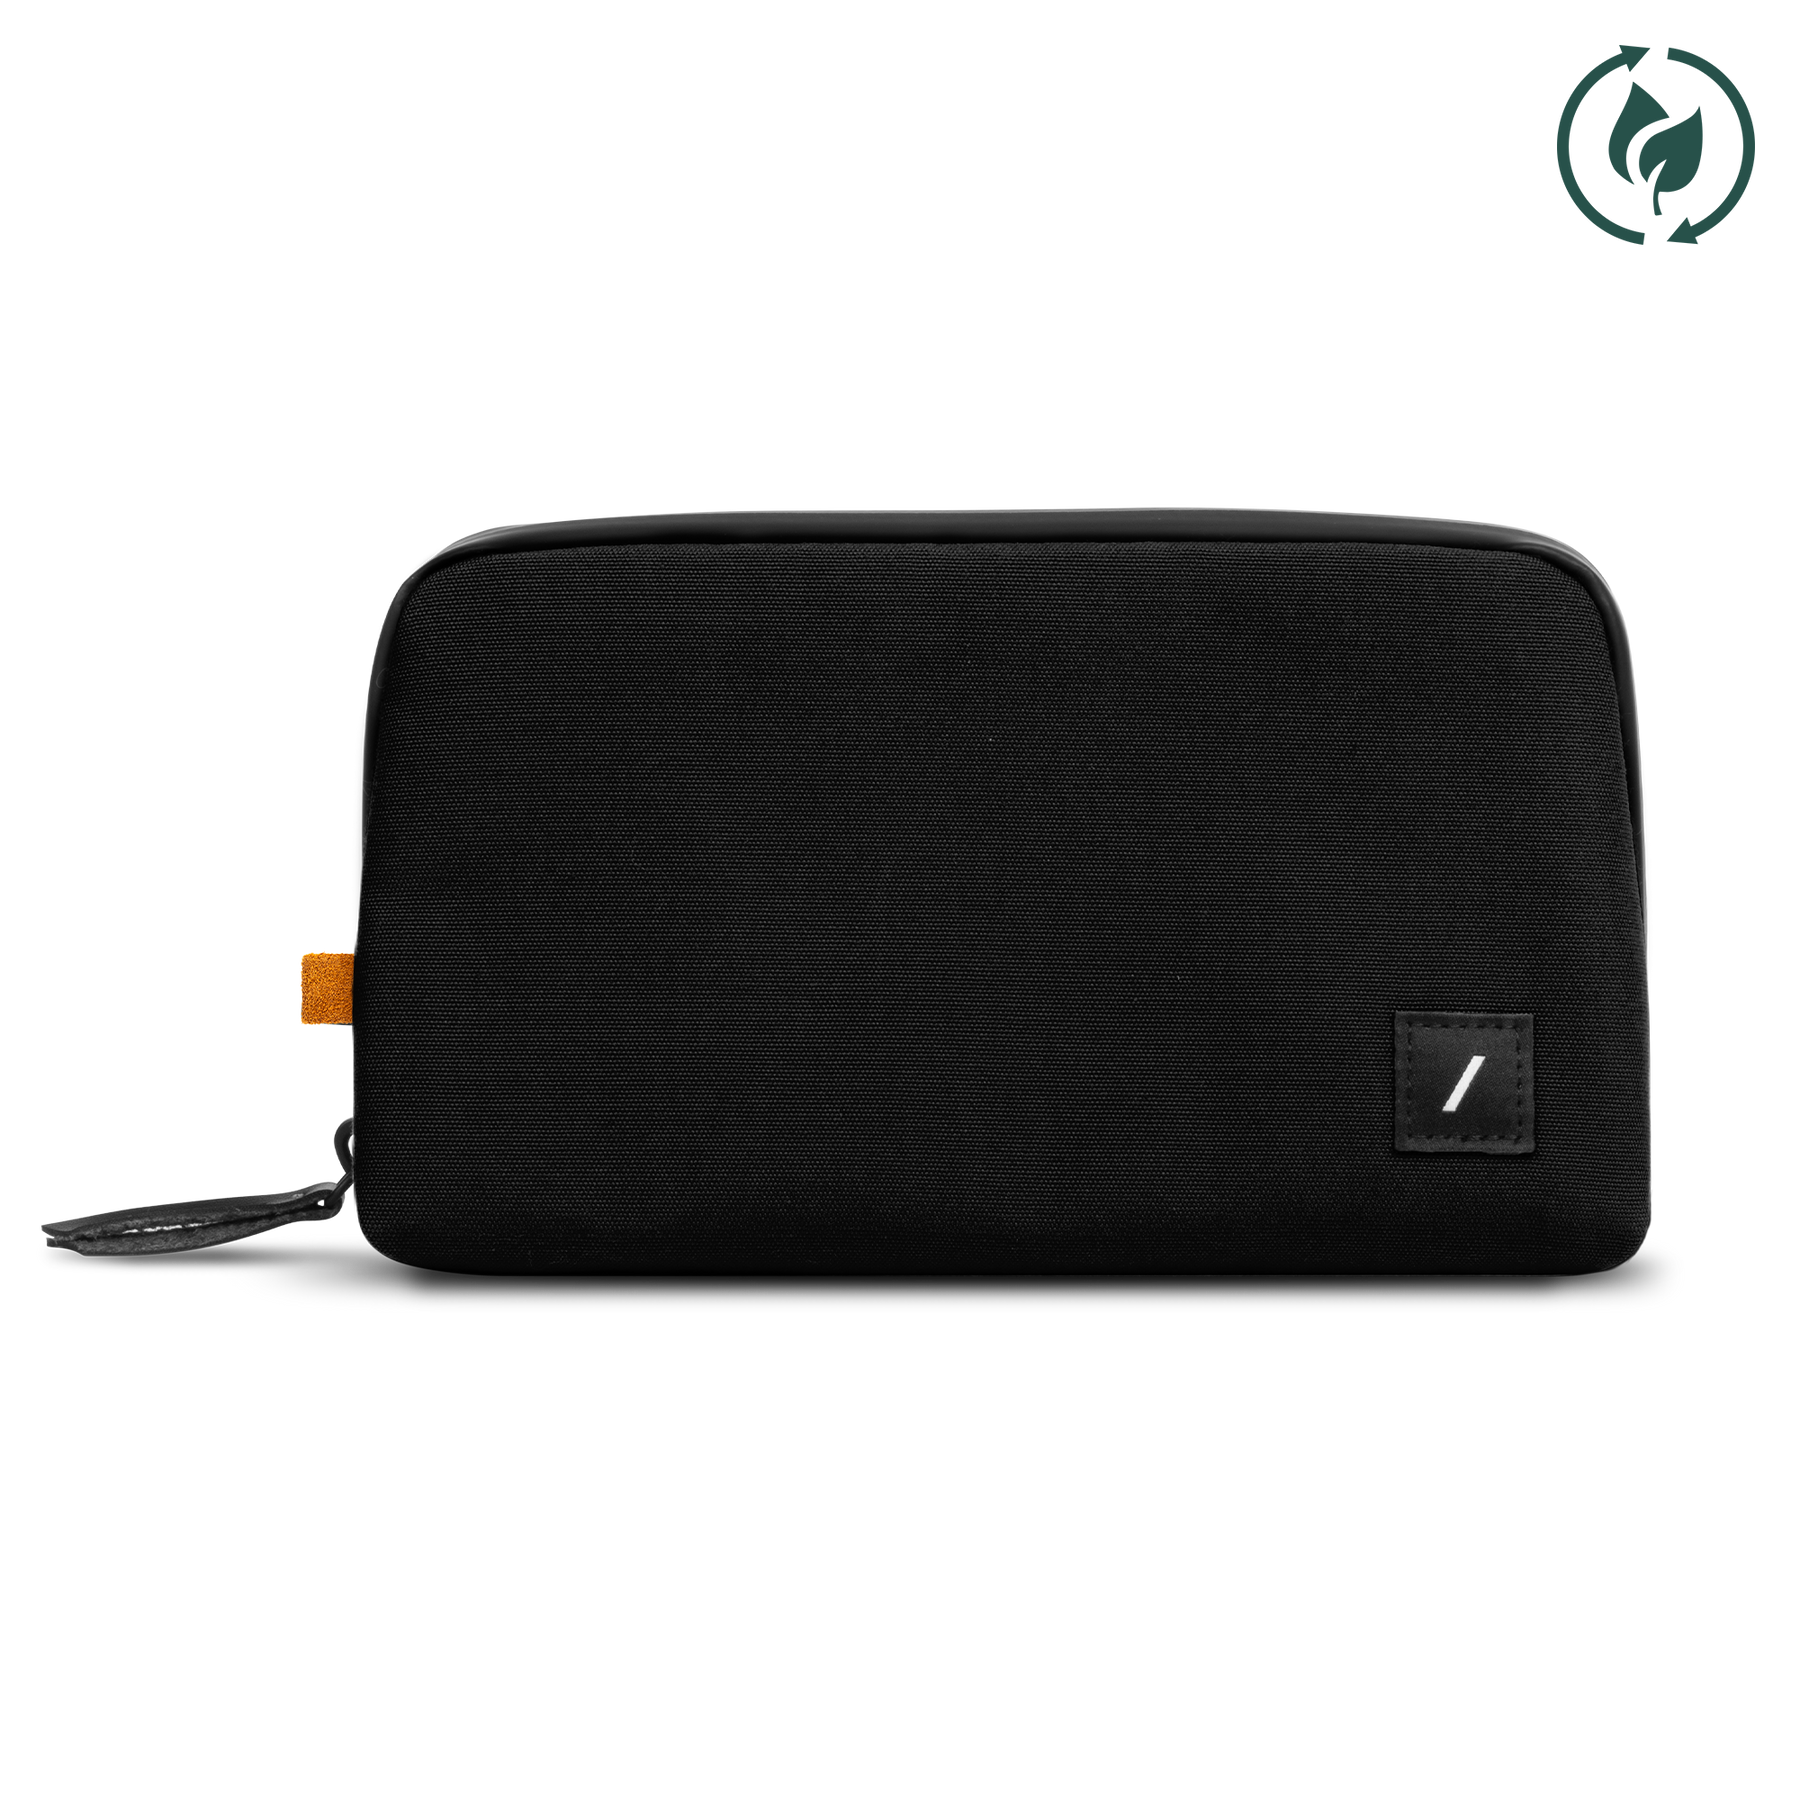 Eco Essentials Pouch, To Carry Tech & Wires